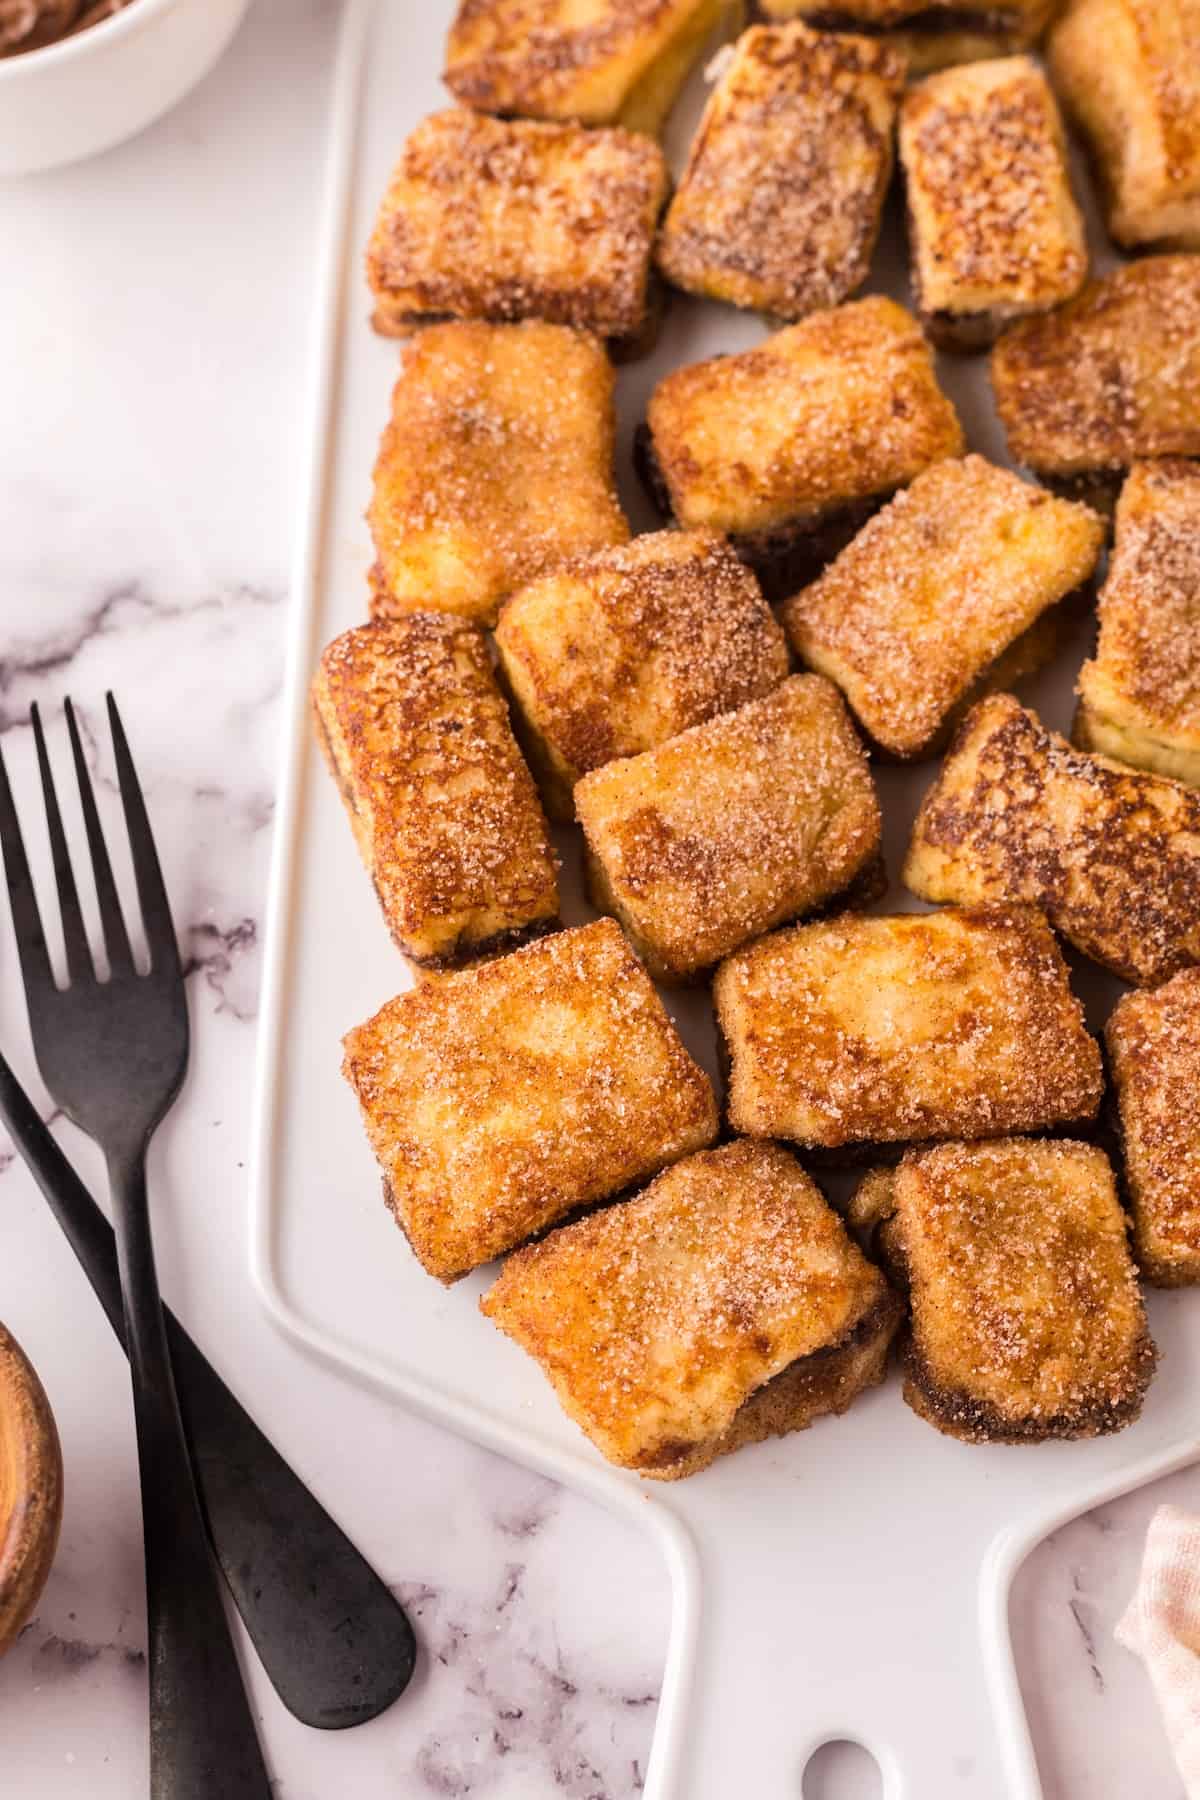 A plate of Stuffed French Toast bites on a marble surface.